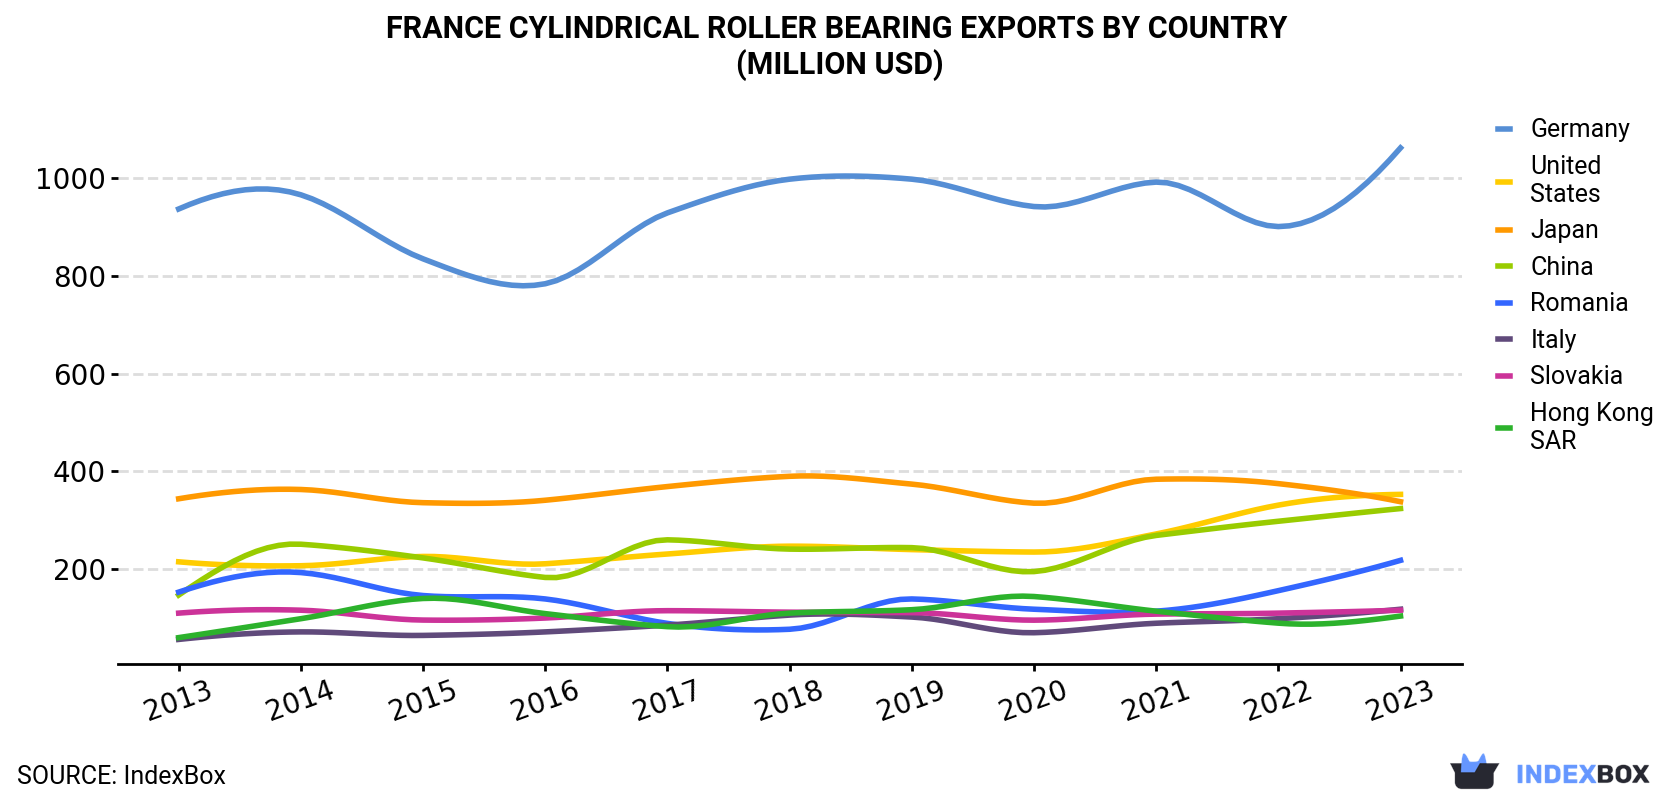 France Cylindrical Roller Bearing Exports By Country (Million USD)